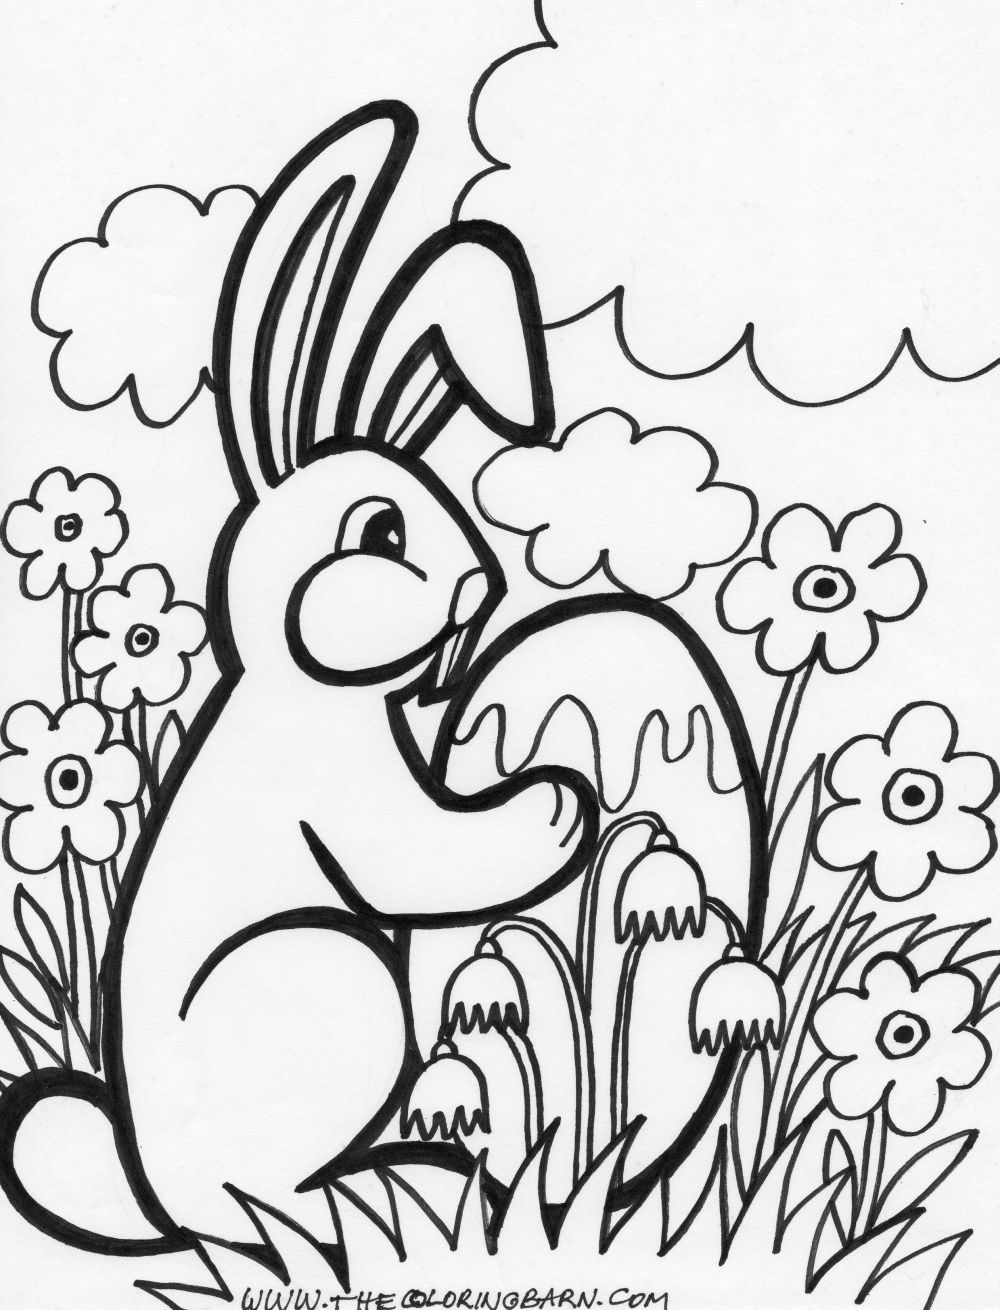 Easter Coloring Pages: Easter Flower Coloring Pages, Easter Flower Coloring Sheets